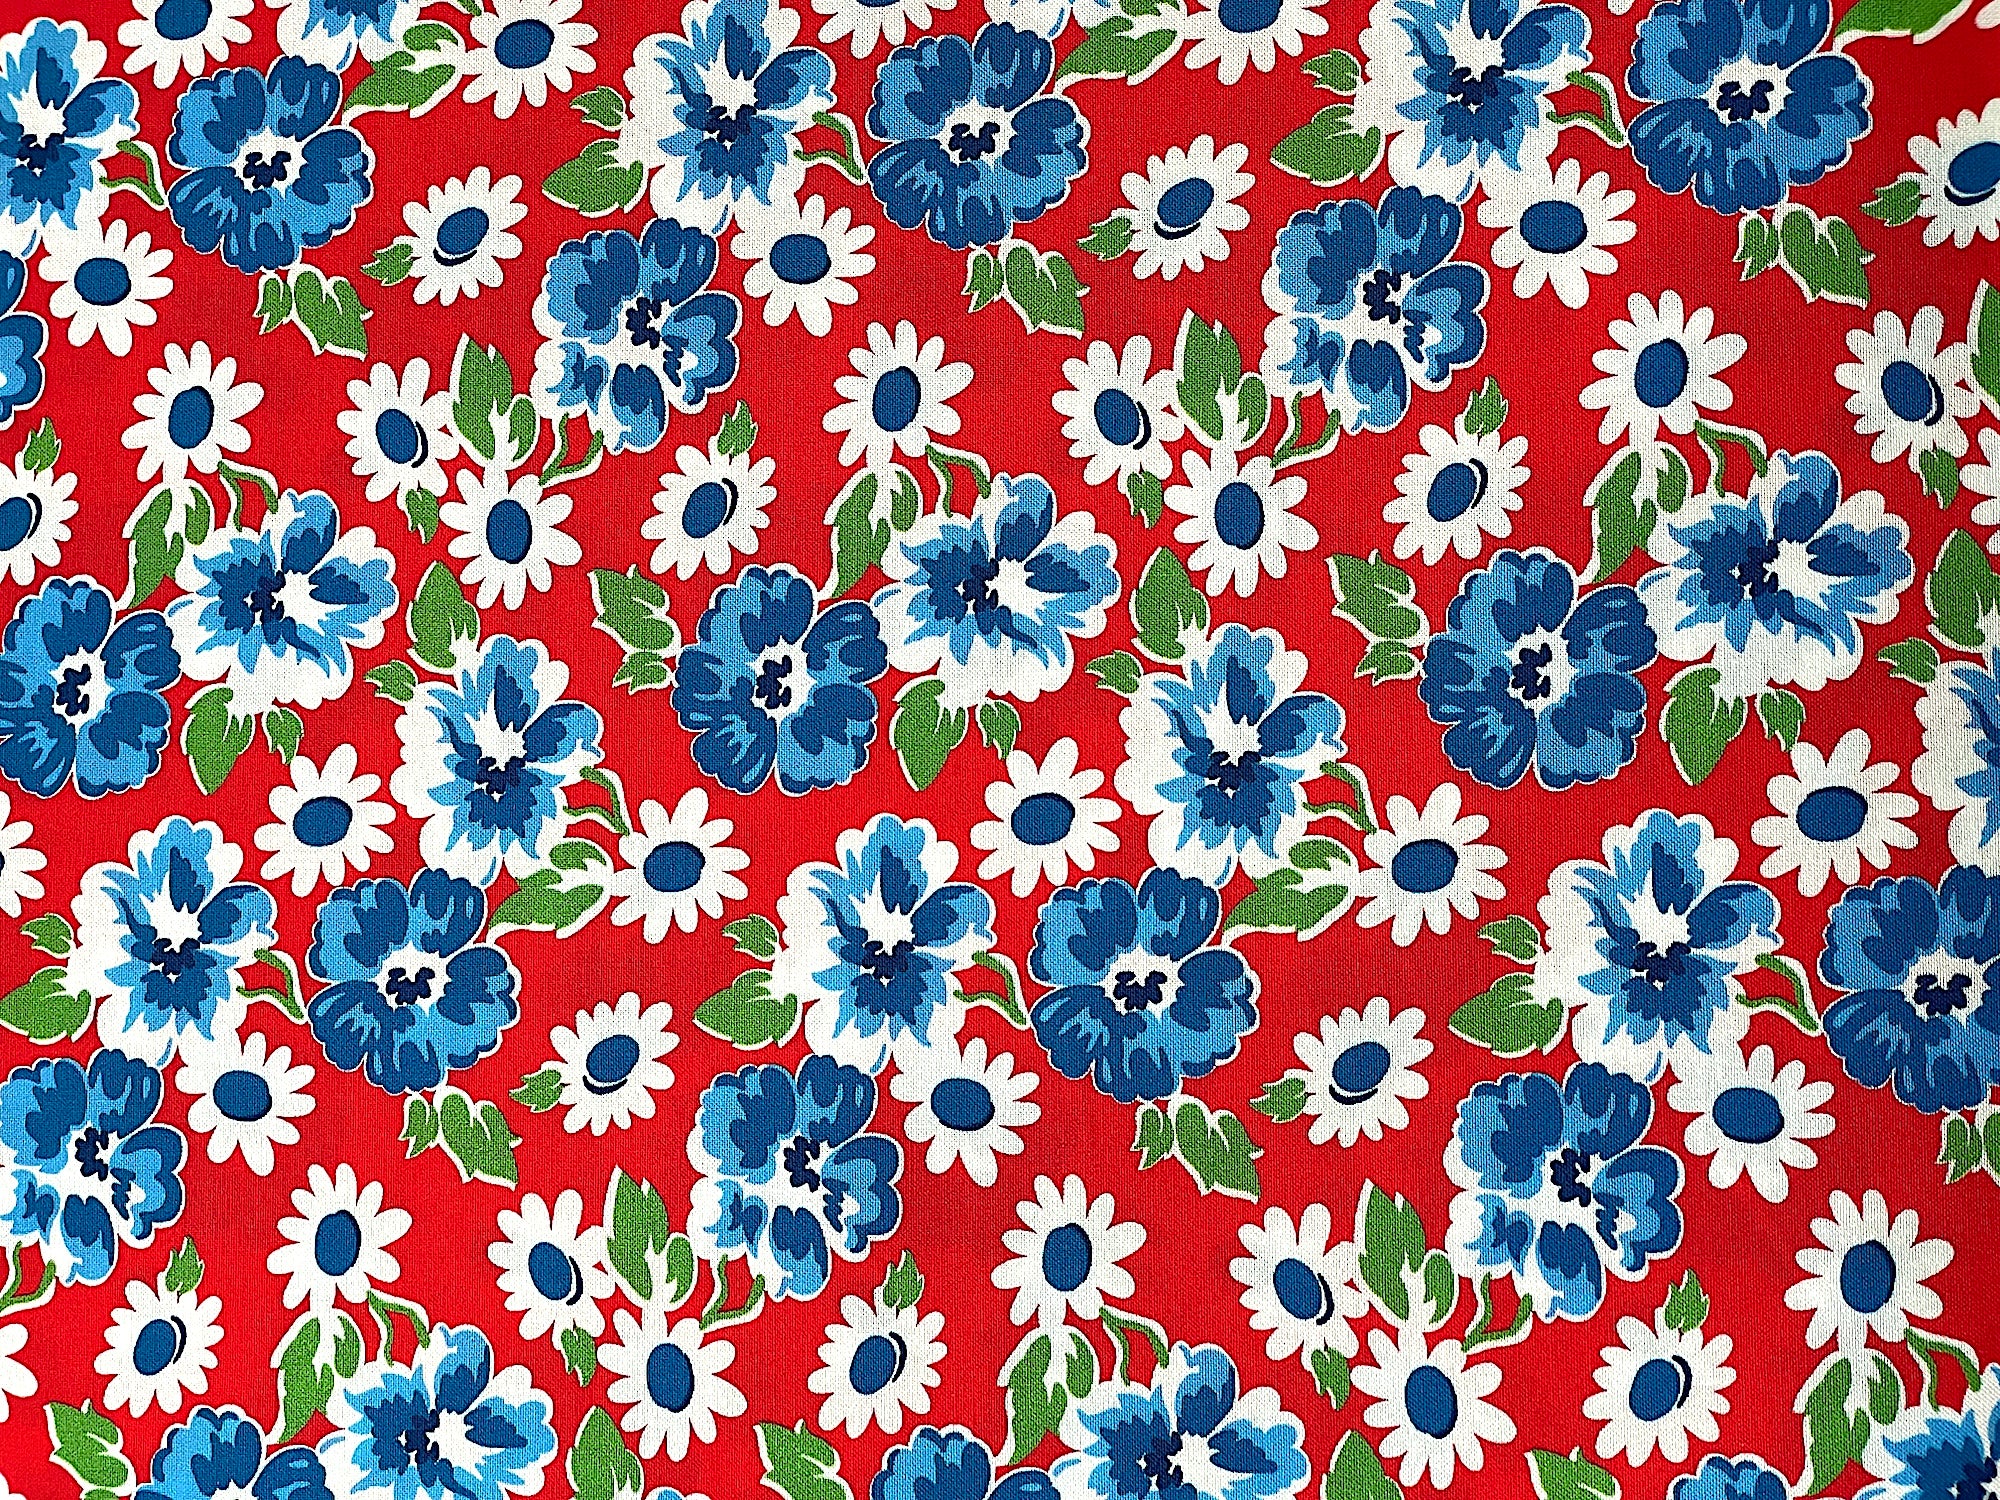 Red cotton fabric covered with blue and white flowers.